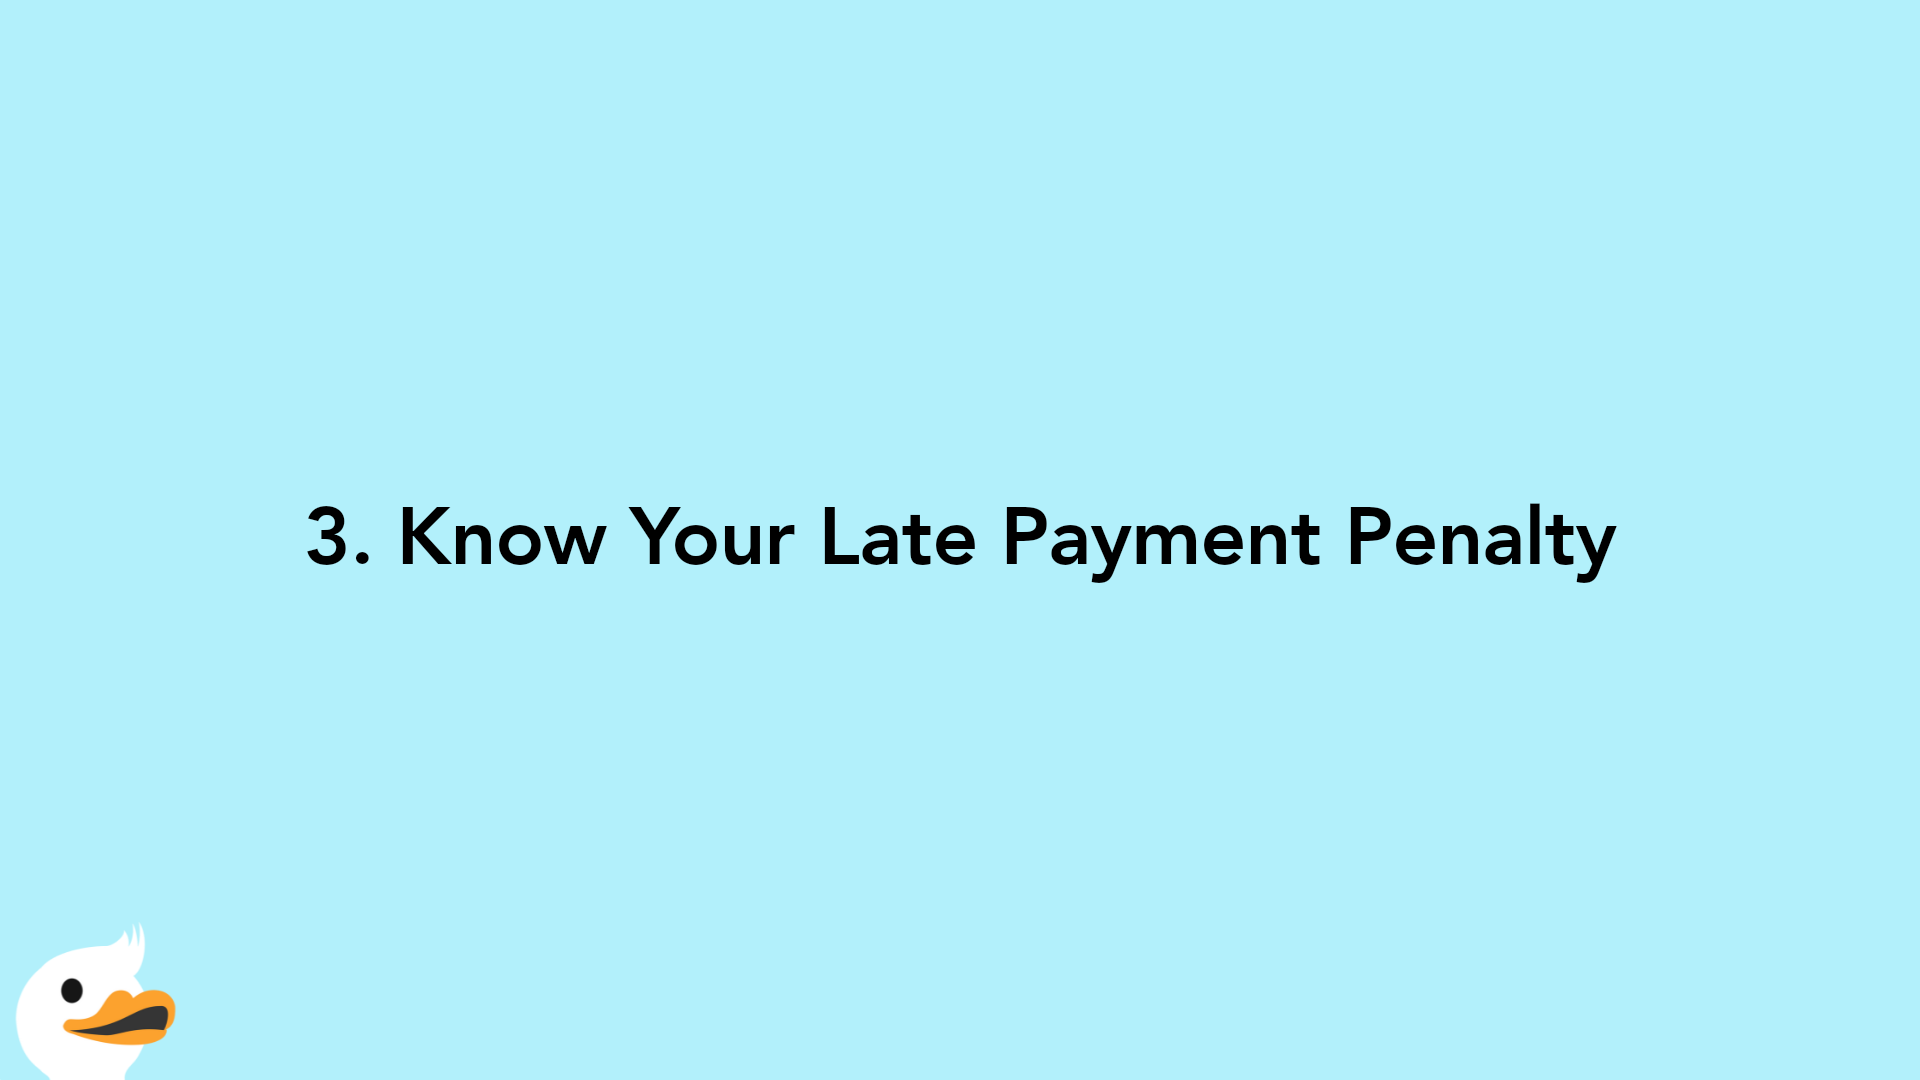 3. Know Your Late Payment Penalty